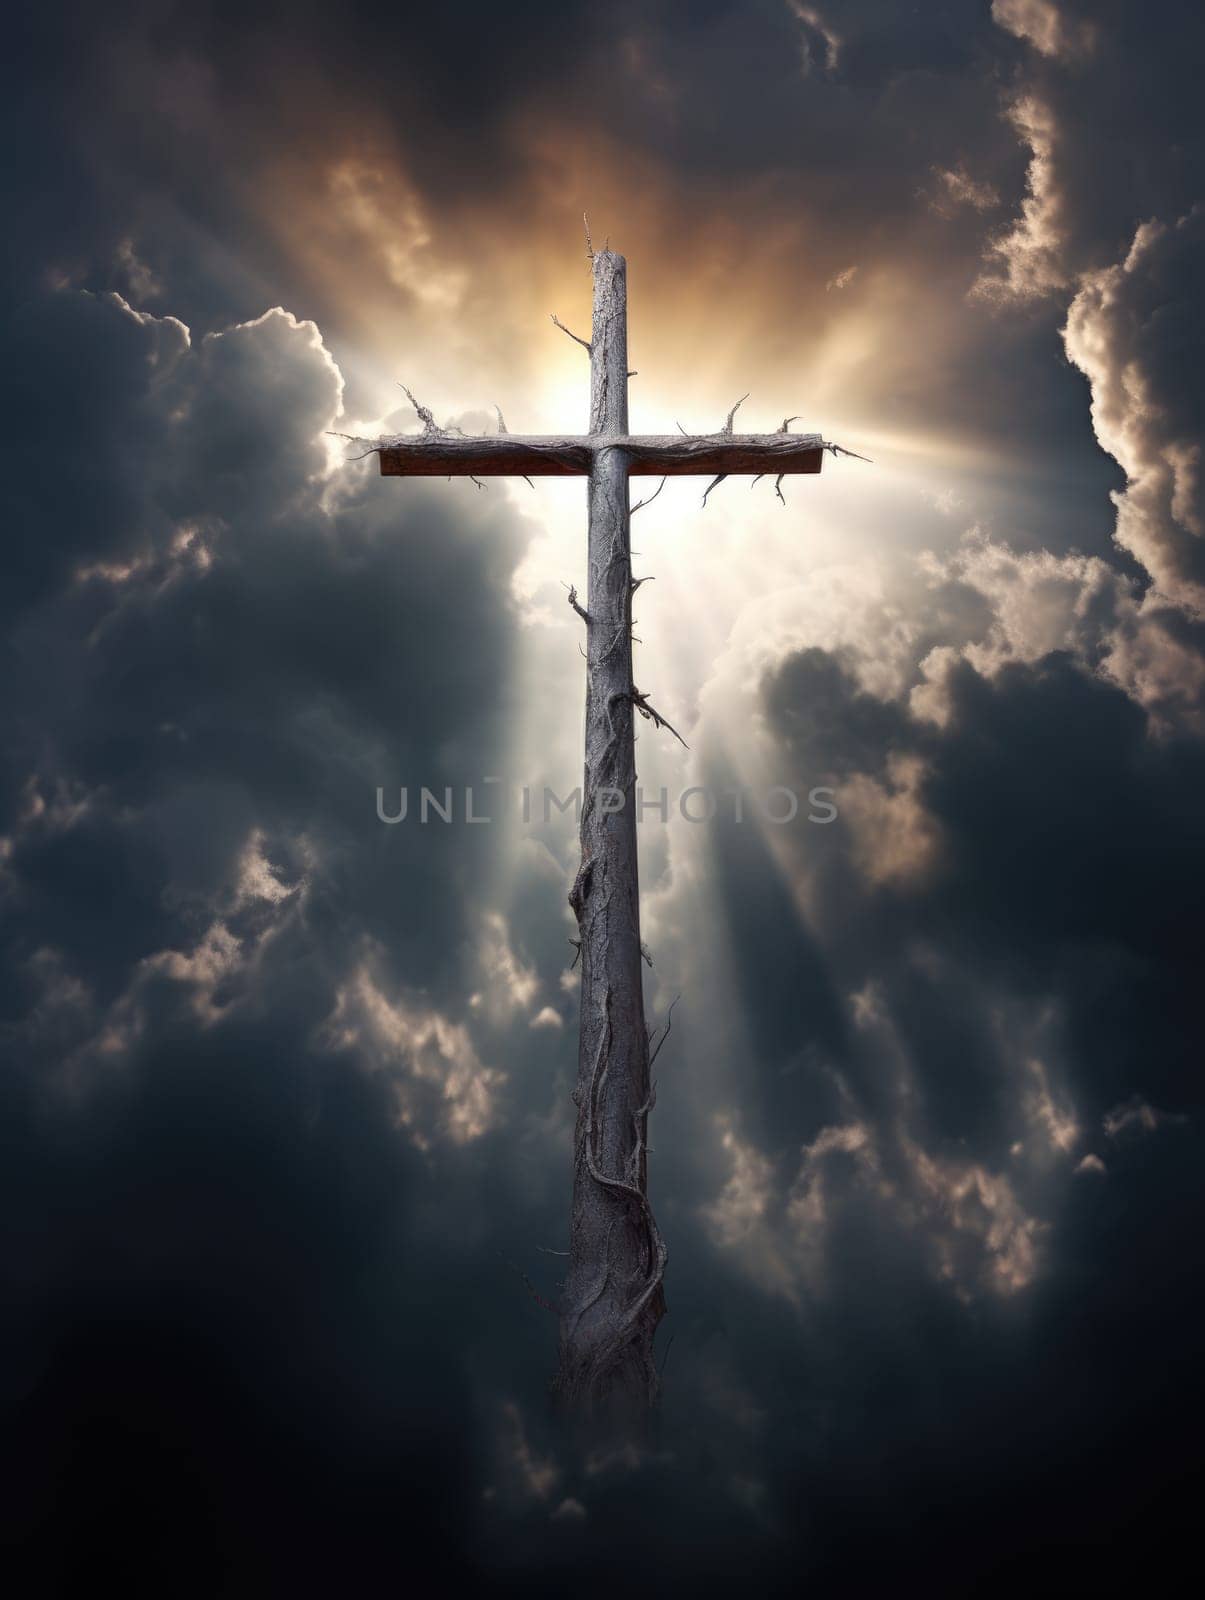 Cross in the clouds radiates the light of faith and hope by palinchak